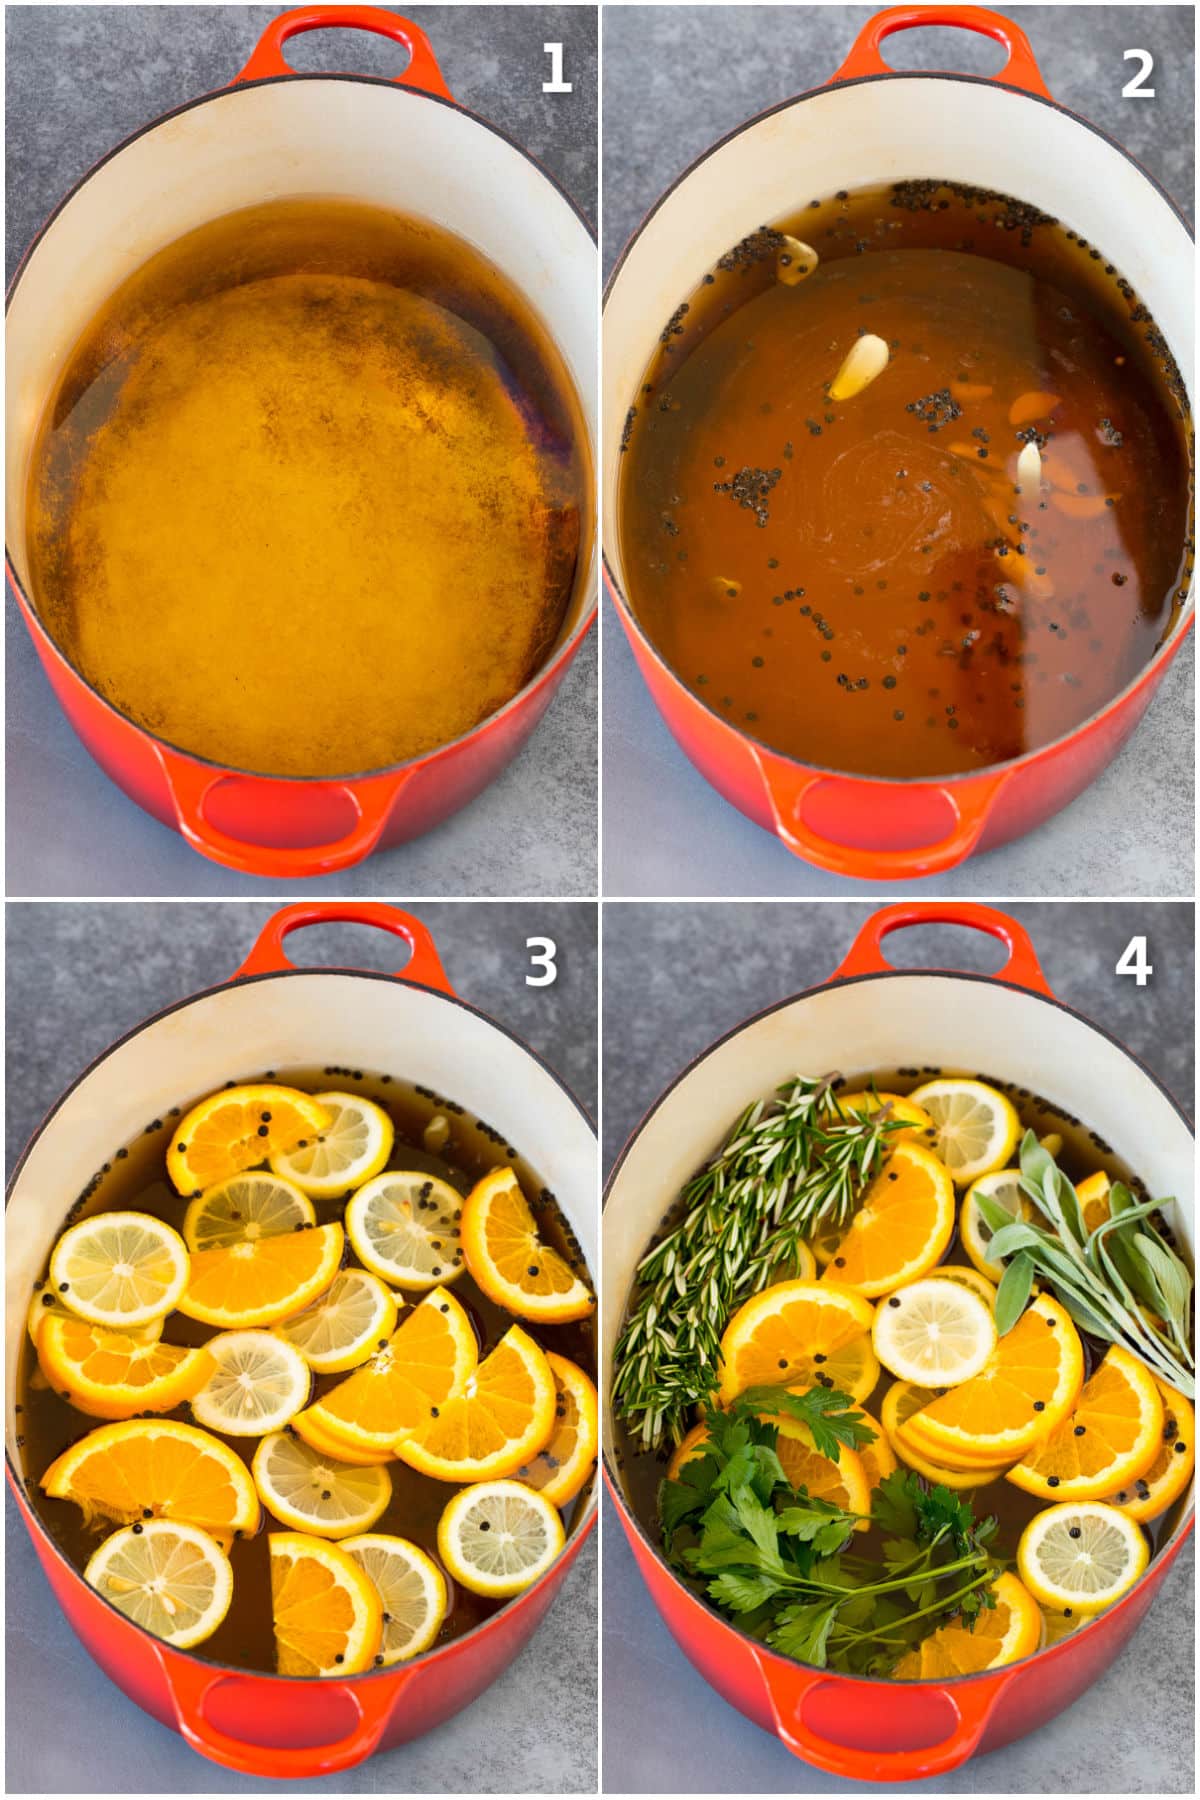 Step by step process shots showing how to make smoked turkey brine.